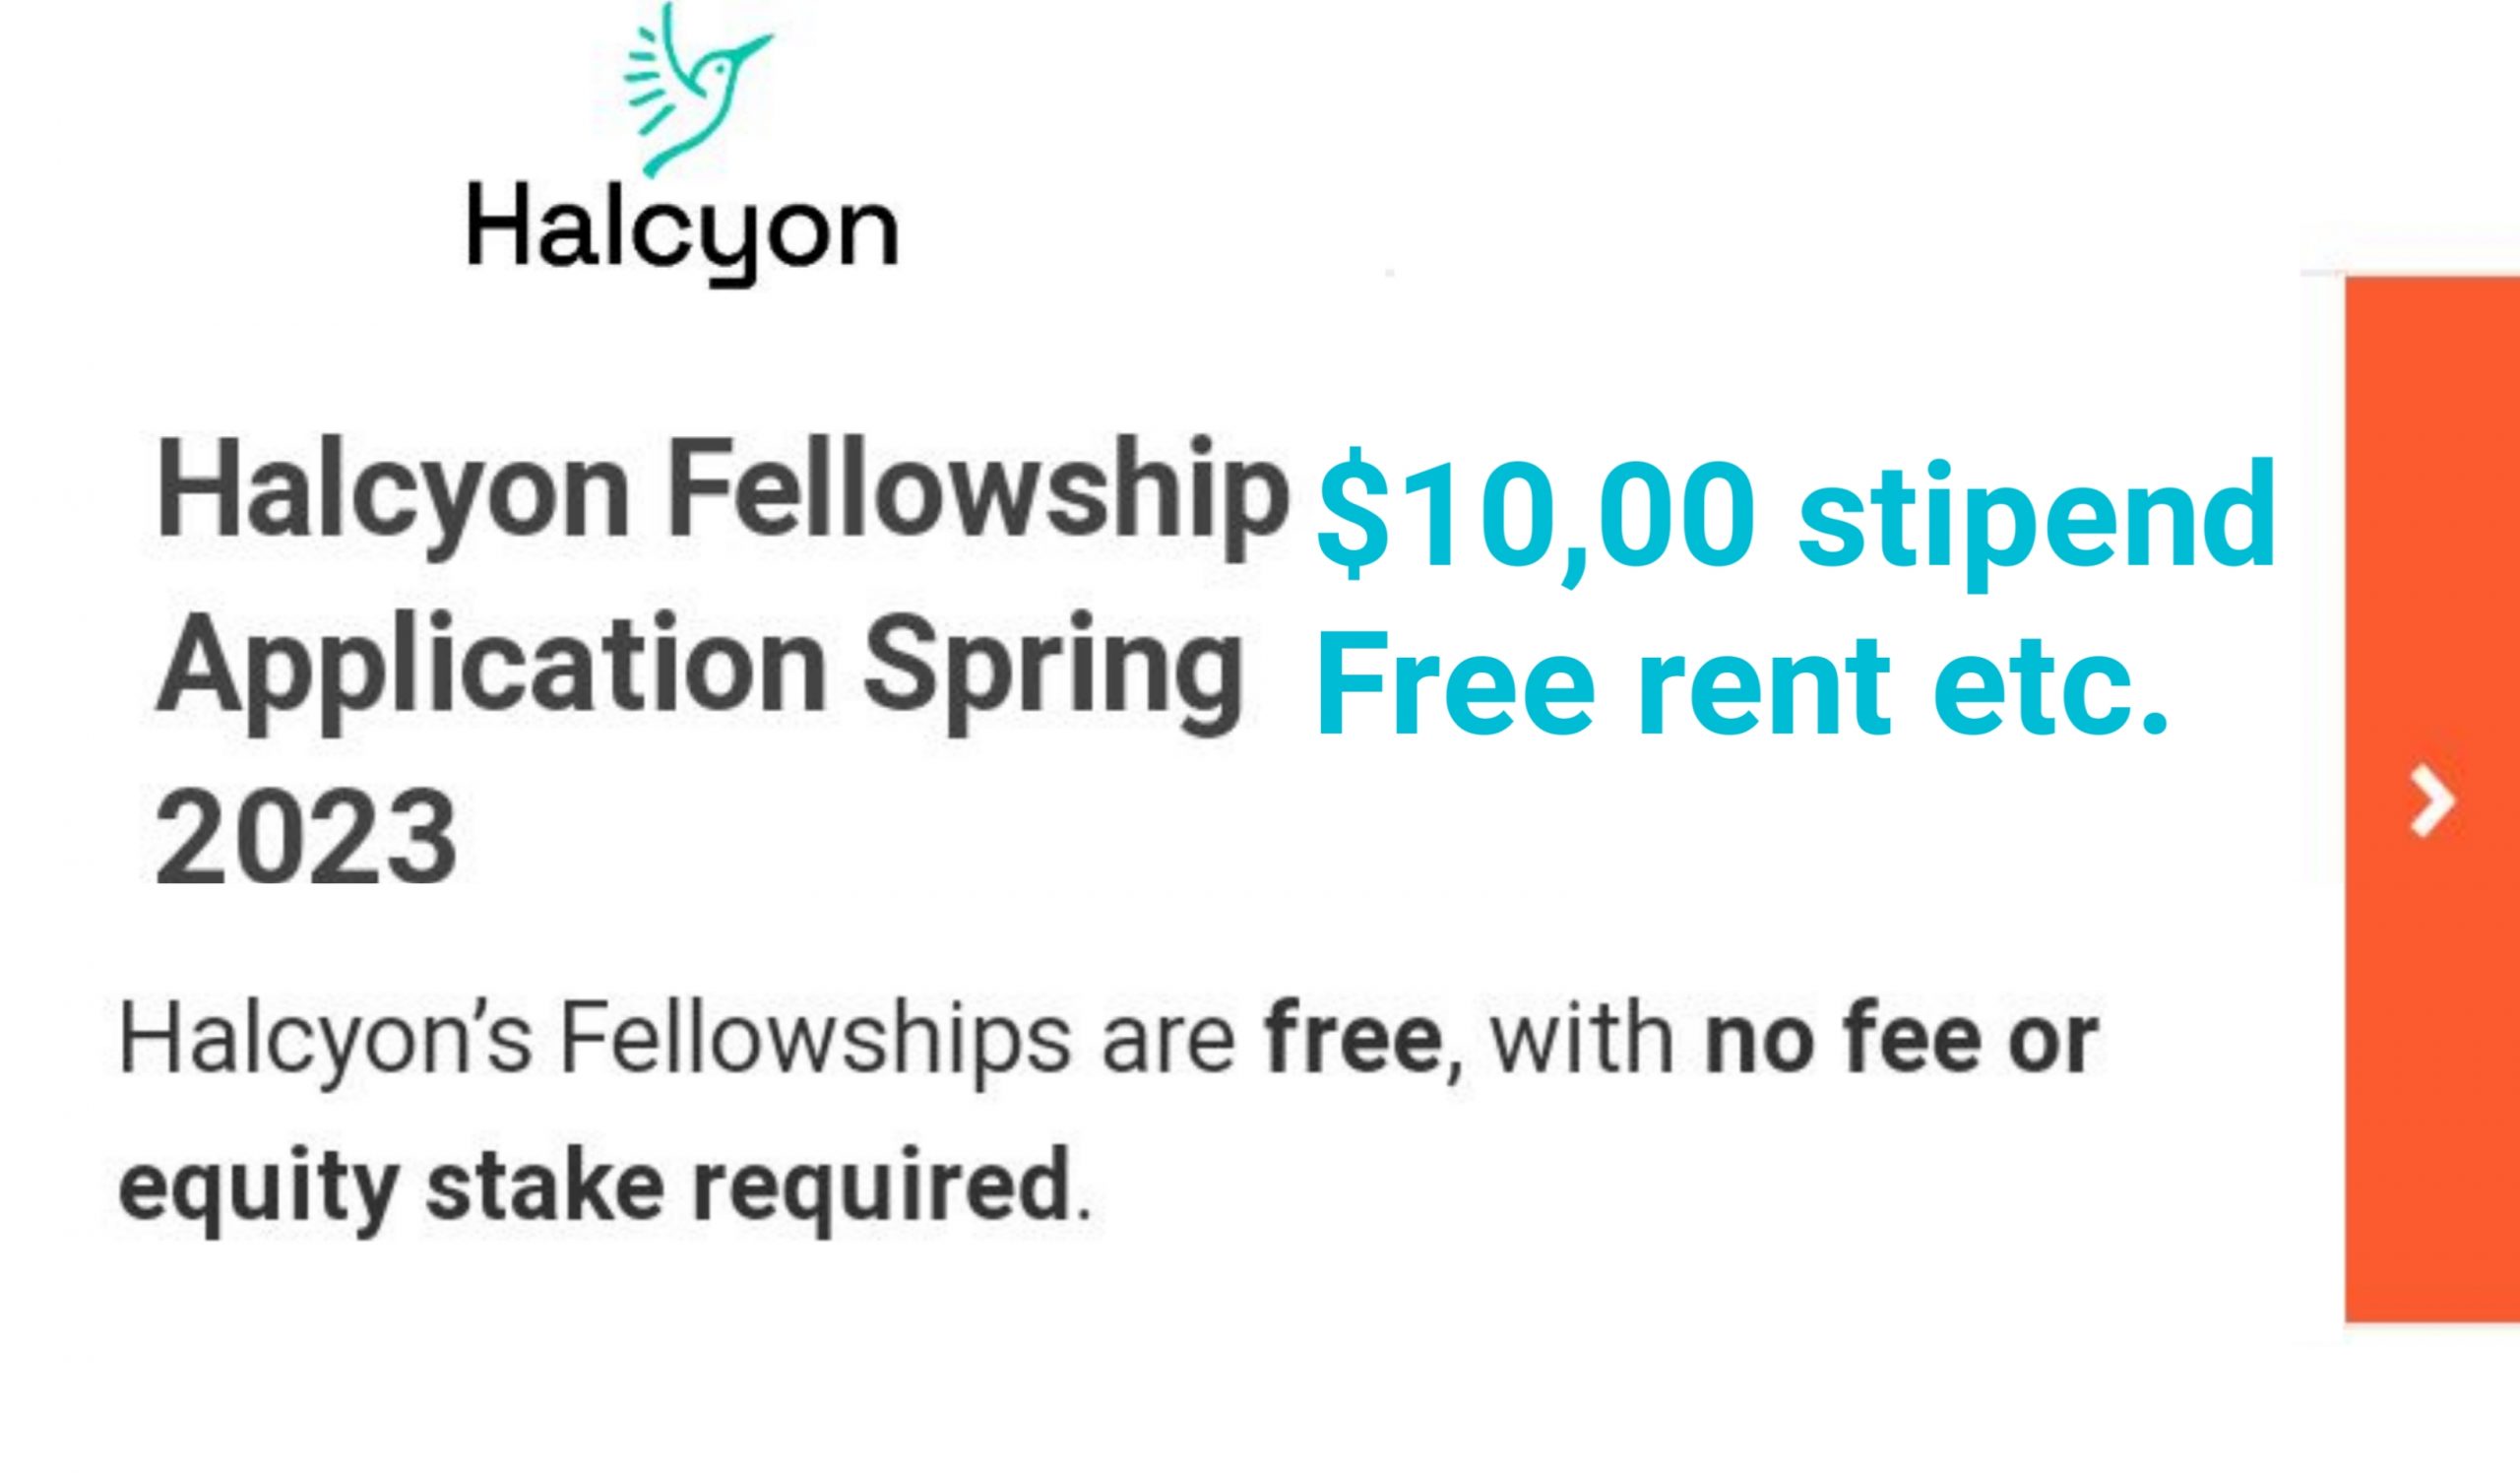 20220918 141701 scaled - Halcyon fully Funded Fellowship Program($10,00 stipend, free rent etc.)